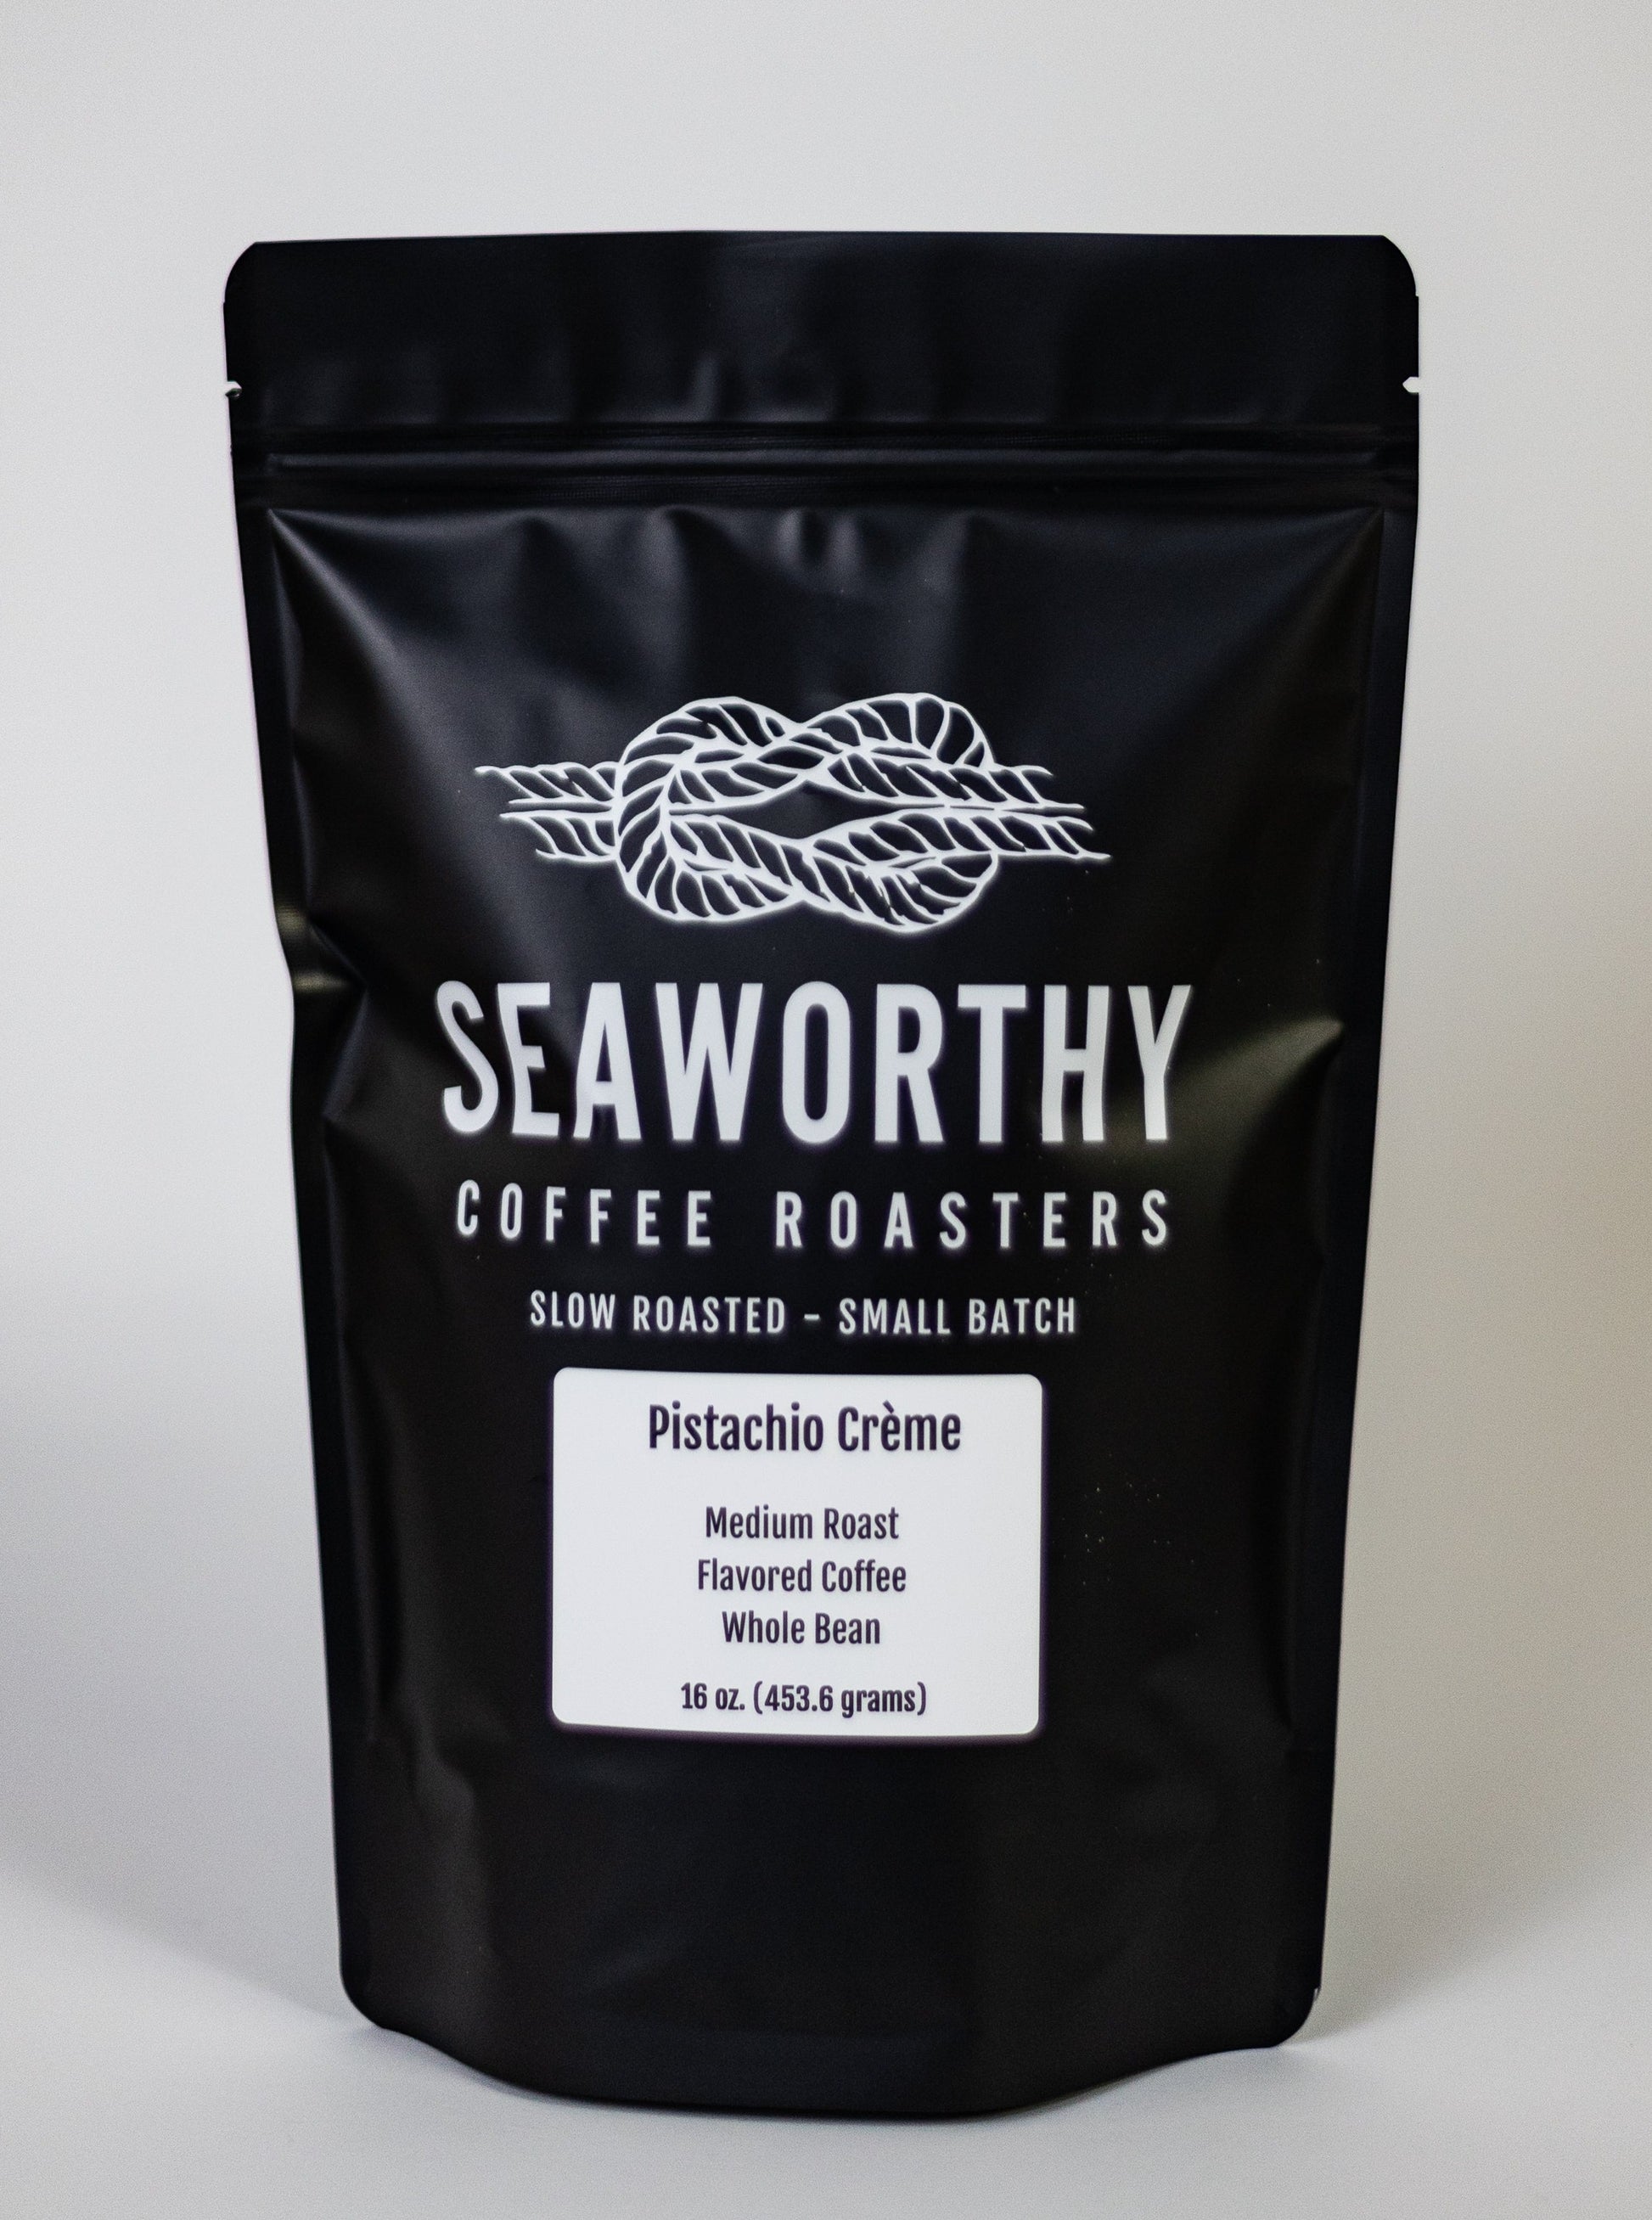 Seaworthy slow roasted, small batch coffee. Imagine yourself at the beach on the first warm day of summer, running up to the ice cream stand for a refreshing cone. Pistachio Ice Cream flavored coffee wants to bring that moment to your mug. We highly recommend enjoying this one cold brewed! As always, there are absolutely no allergens or sugars in Seaworthy flavored coffee.